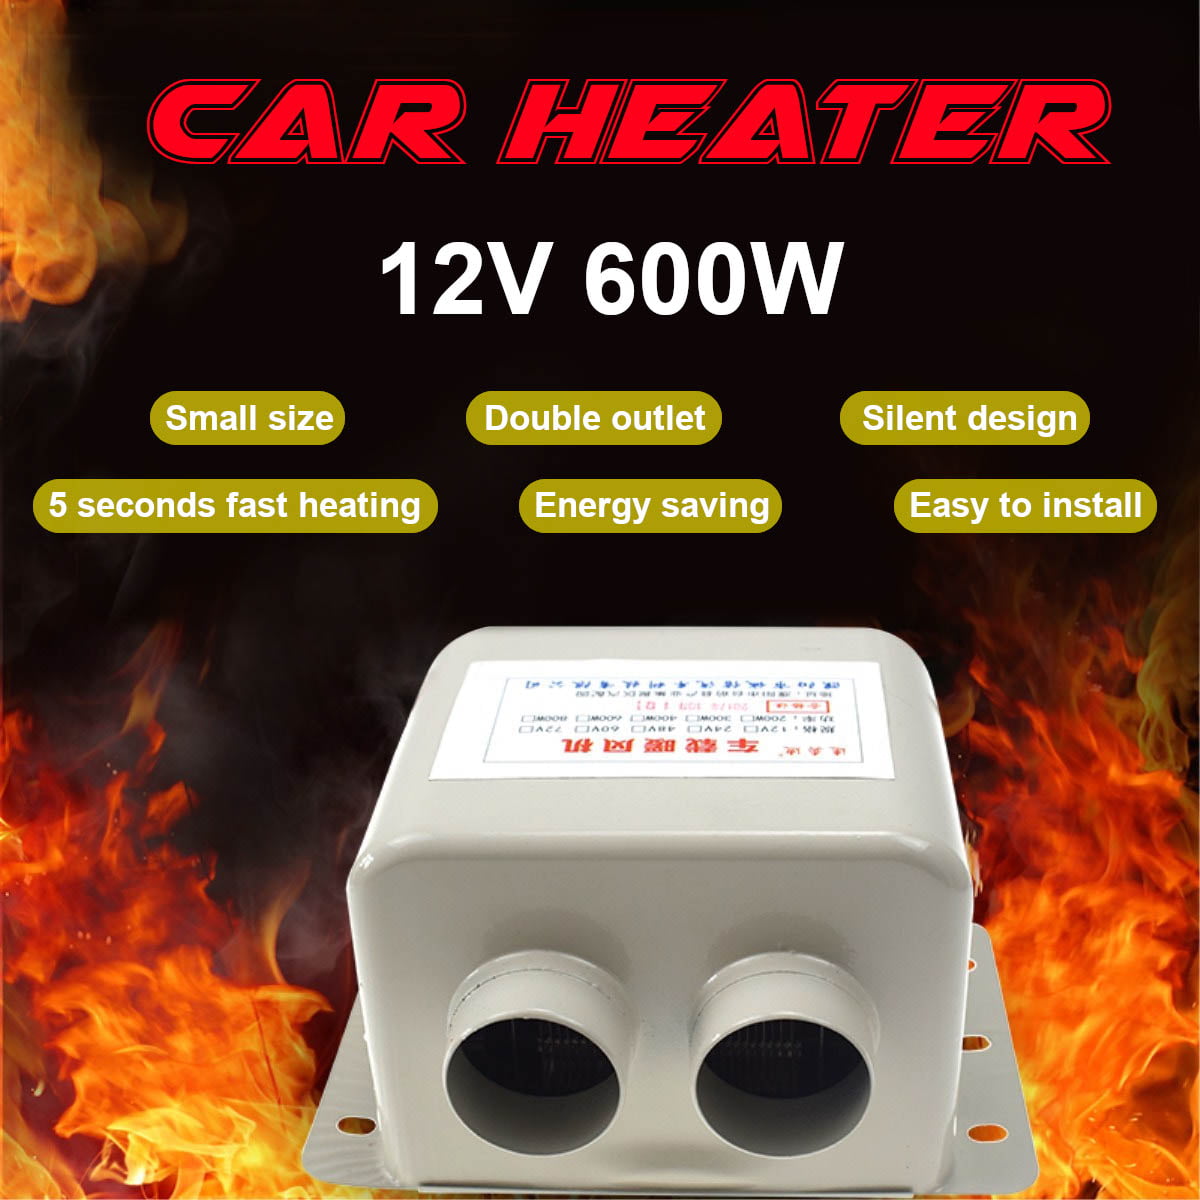 PAR Car Heater 12V 600W Portable Car Fan Heaters with Thickened Copper Wire Car Heated Fan Demister for Glasses Windshield De-Icers Defroster